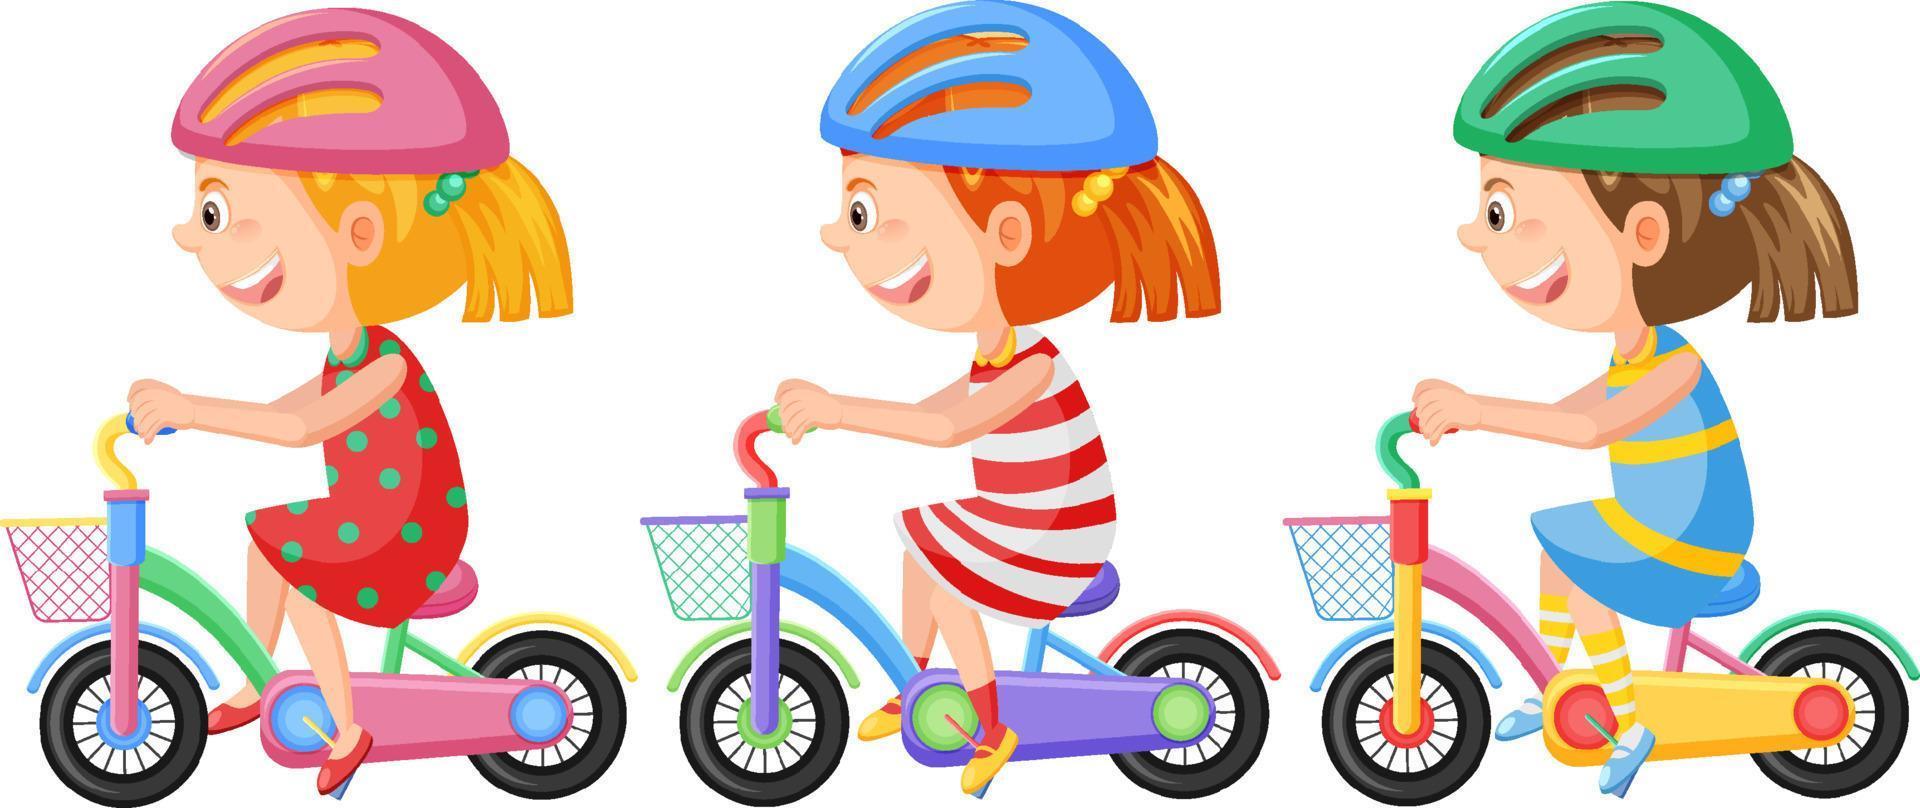 Three girls riding bicycles in cartoon style vector